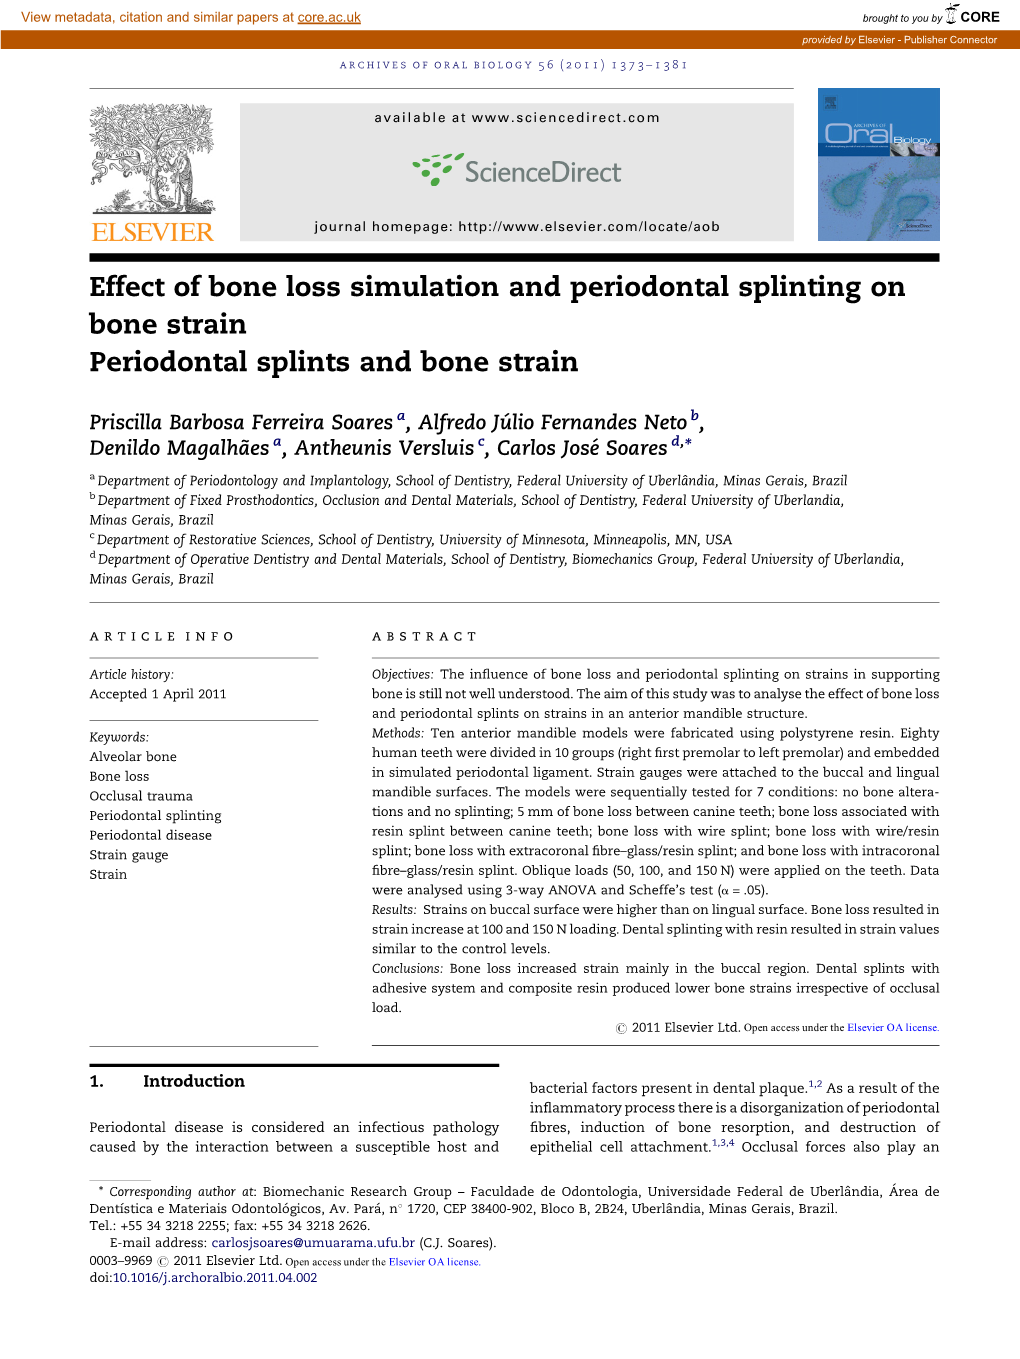 Effect of Bone Loss Simulation and Periodontal Splinting On